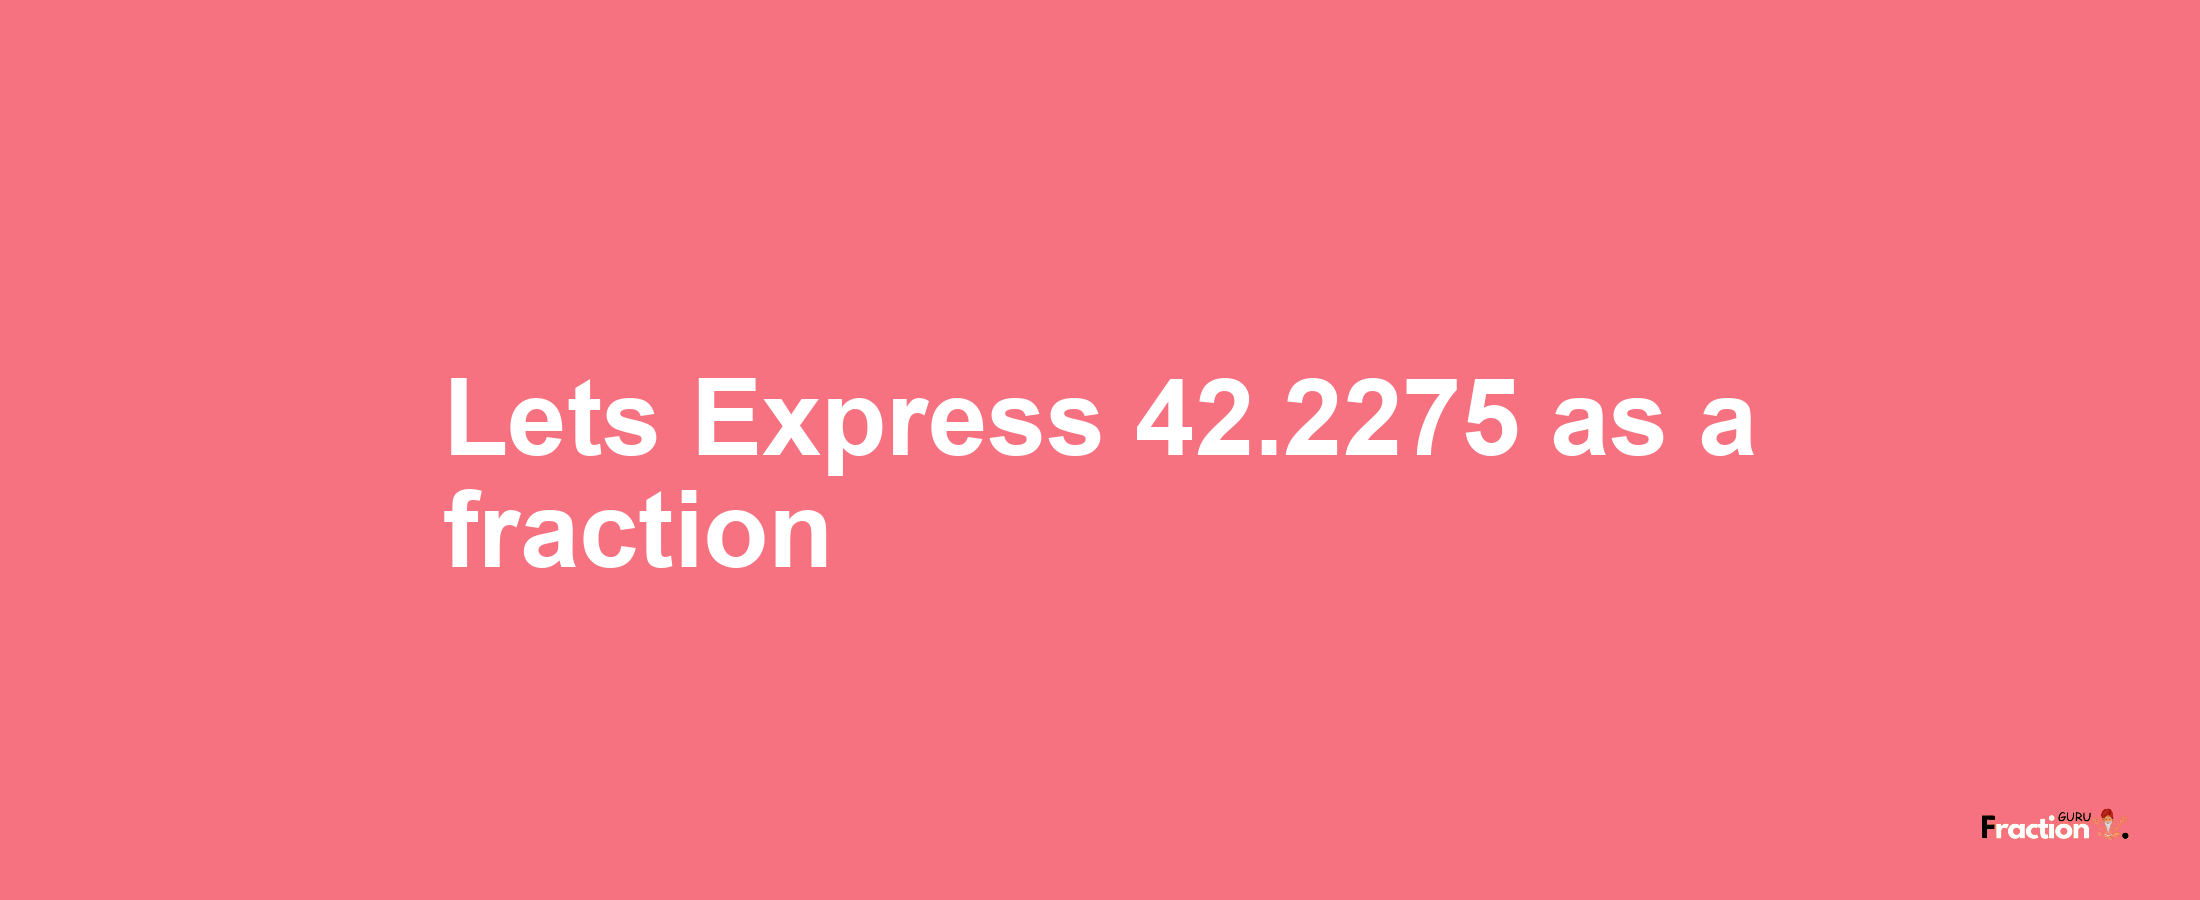 Lets Express 42.2275 as afraction